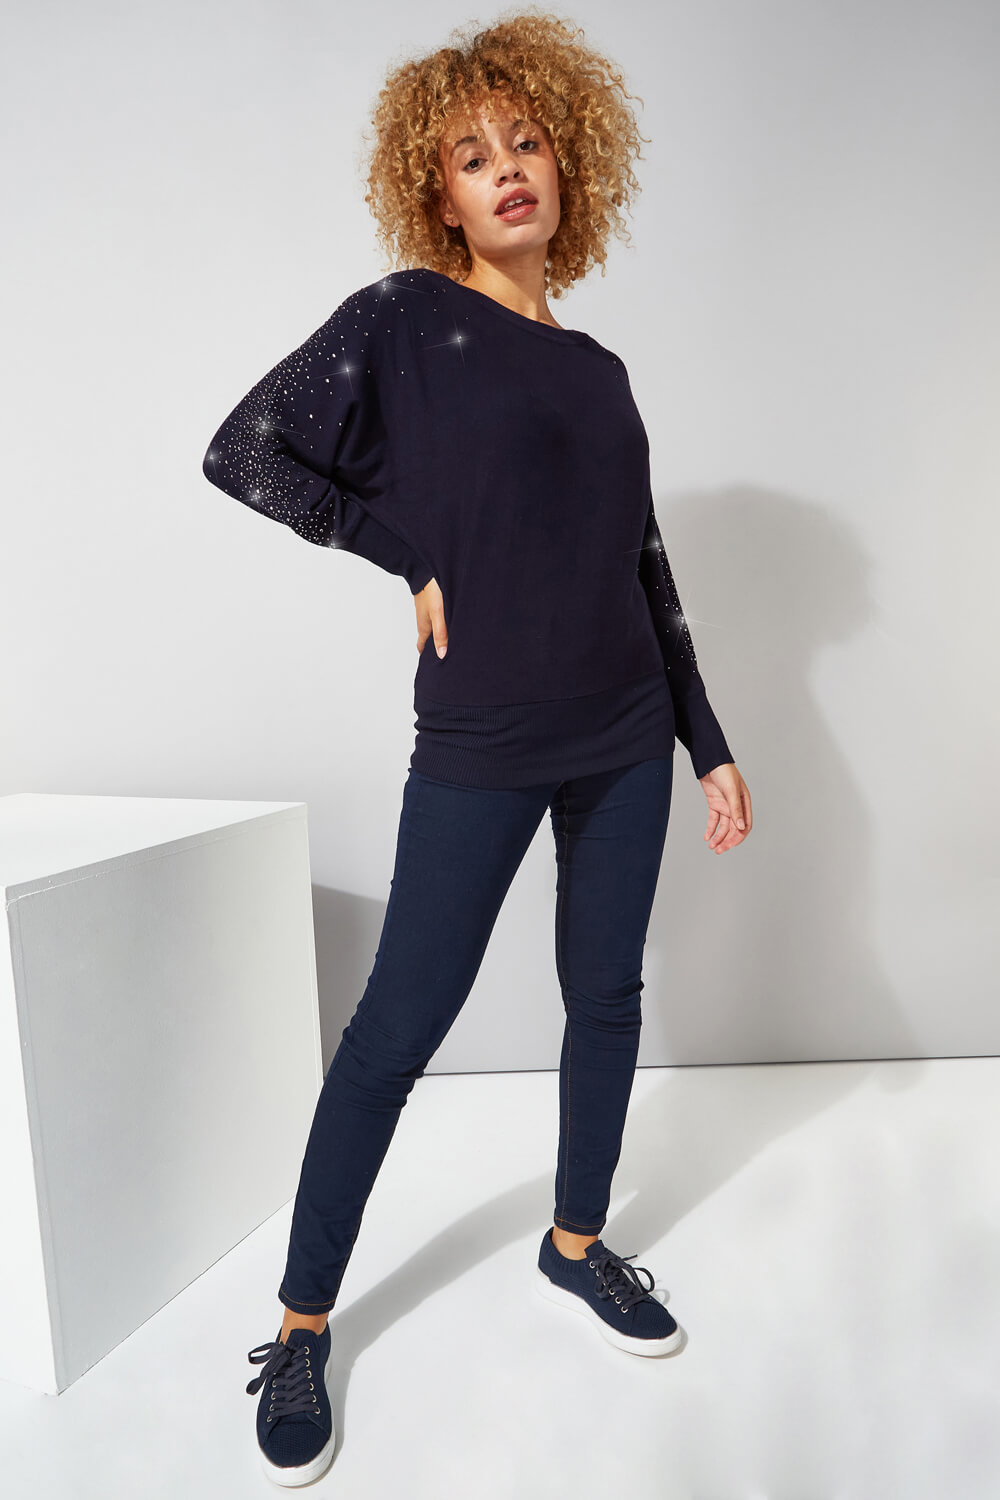 Midnight-Blue Diamante Embellished Batwing Jumper, Image 2 of 4